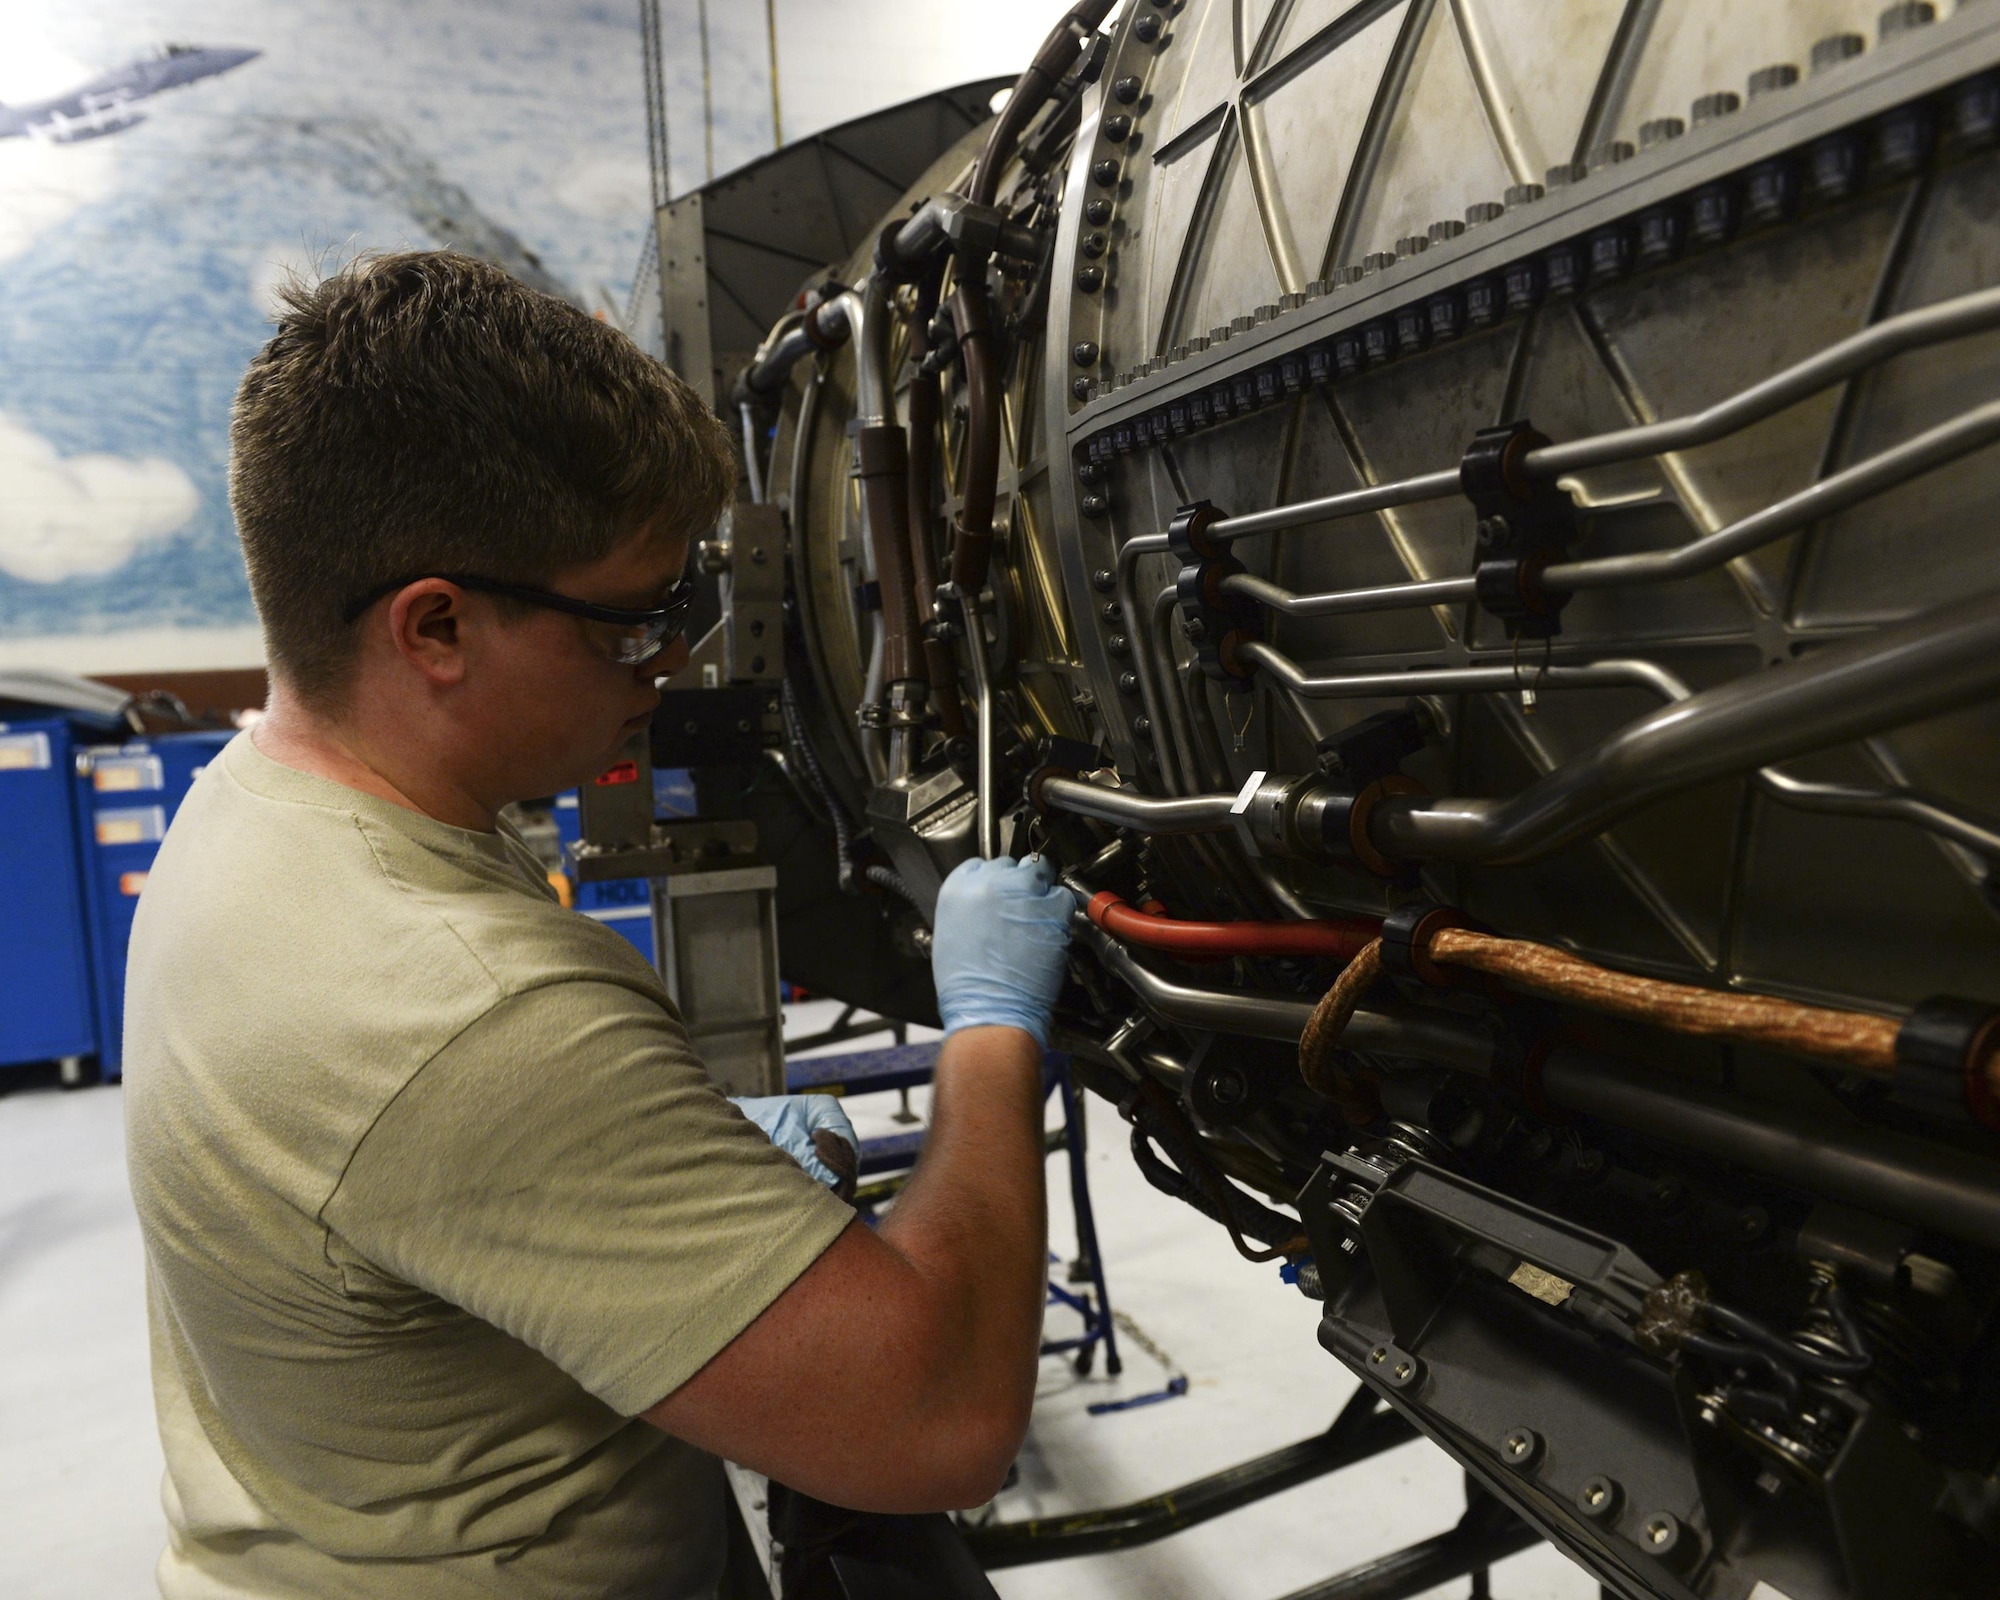 U.S. Air Force Airman 1st Class Derrek Ashmore, 325th Maintenance Squadron aerospace propulsion technician, cleans the side of an F-119 engine in the Propulsion Flight hangar at Tyndall Air Force Base, Fla., Aug. 29, 2016. Aerospace propulsion technicians test, maintain and repair all parts of the engines used to power the F-22 Raptor. (U.S. Air Force photo by Airman 1st Class Cody R. Miller/Released)